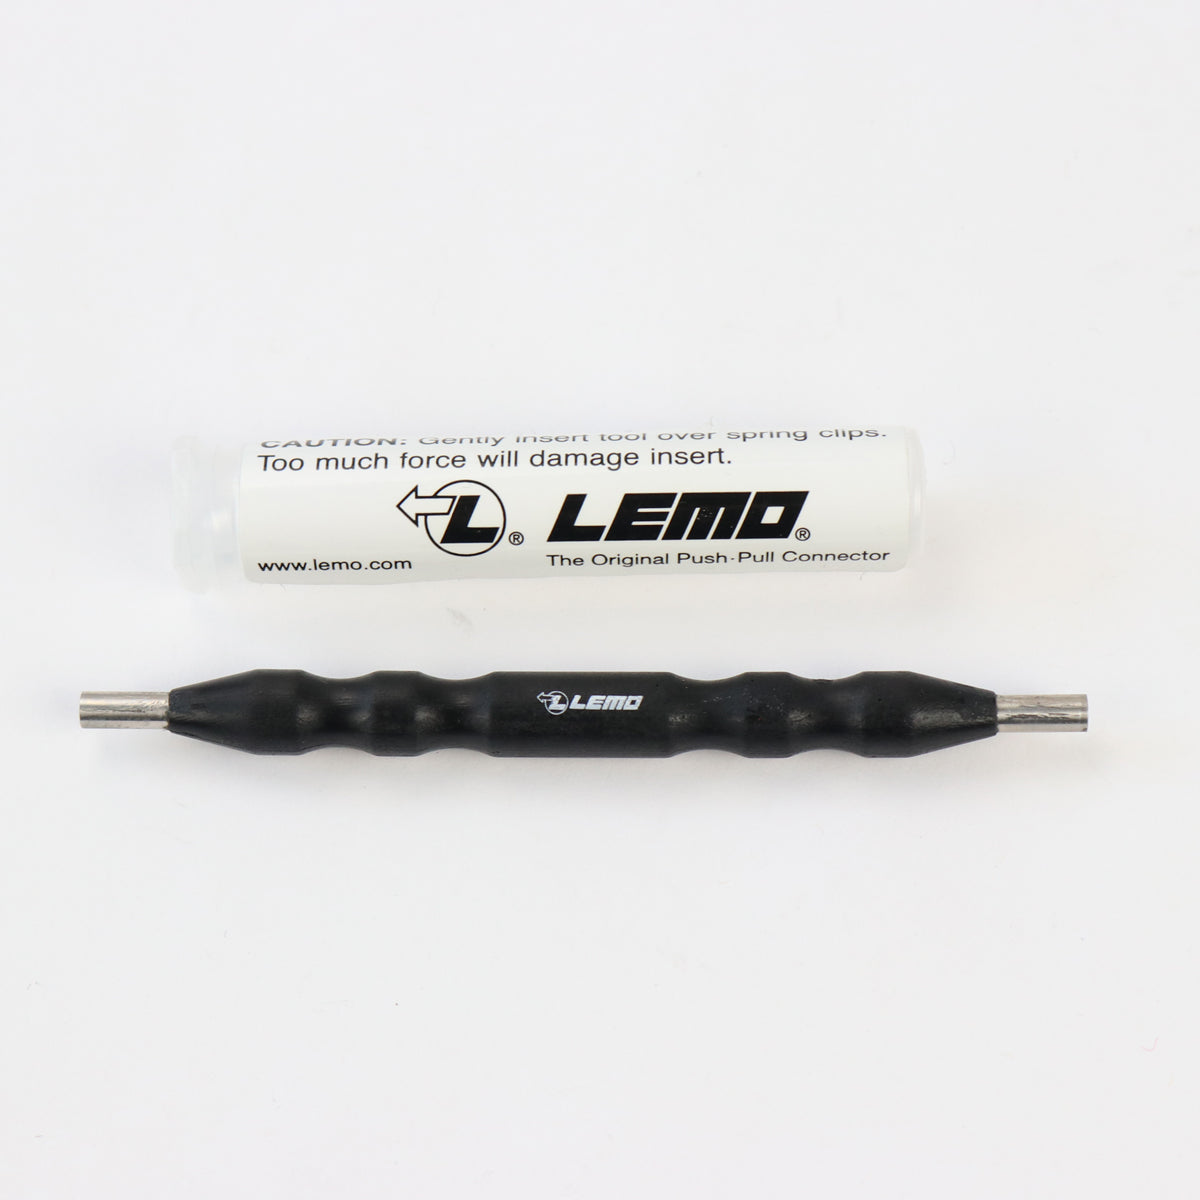 Alignment Sleeve Tool For LEMO SMPTE Connectors